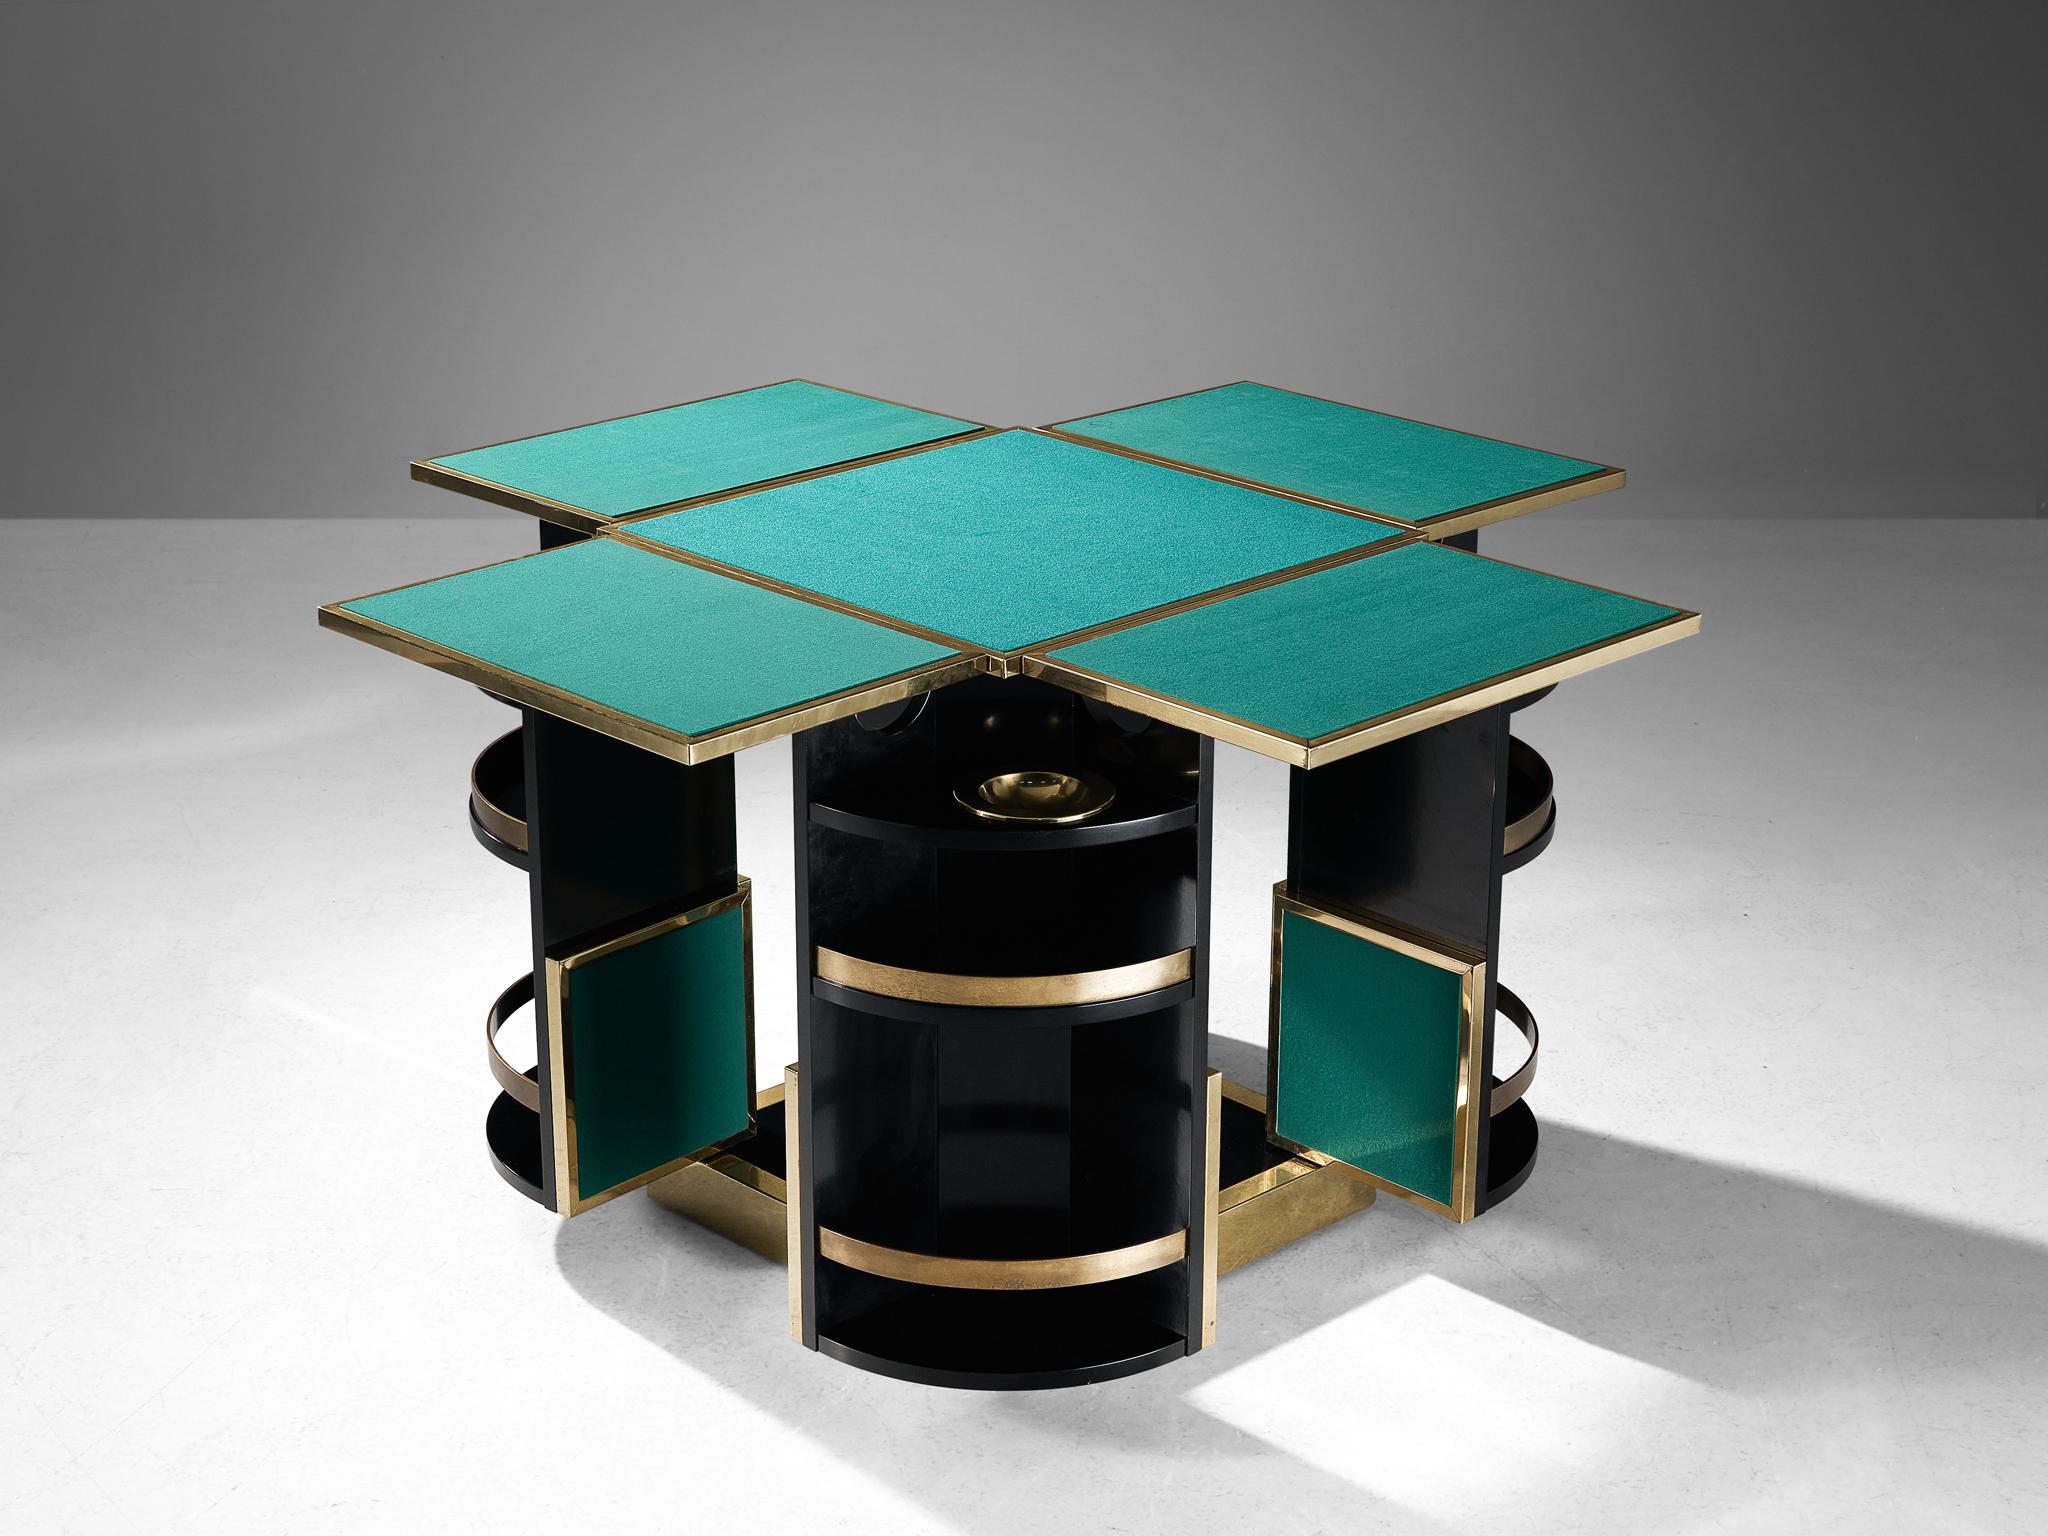 Renato Meneghetti, 'Cubo' game table, brass, felt, metal, wood, Italy, 1970s

Designed by Renato Meneghetti circa 1970, this rare transforming 'Cubo' gaming table has great practical details. For instance, the foldable table leaves and extendable